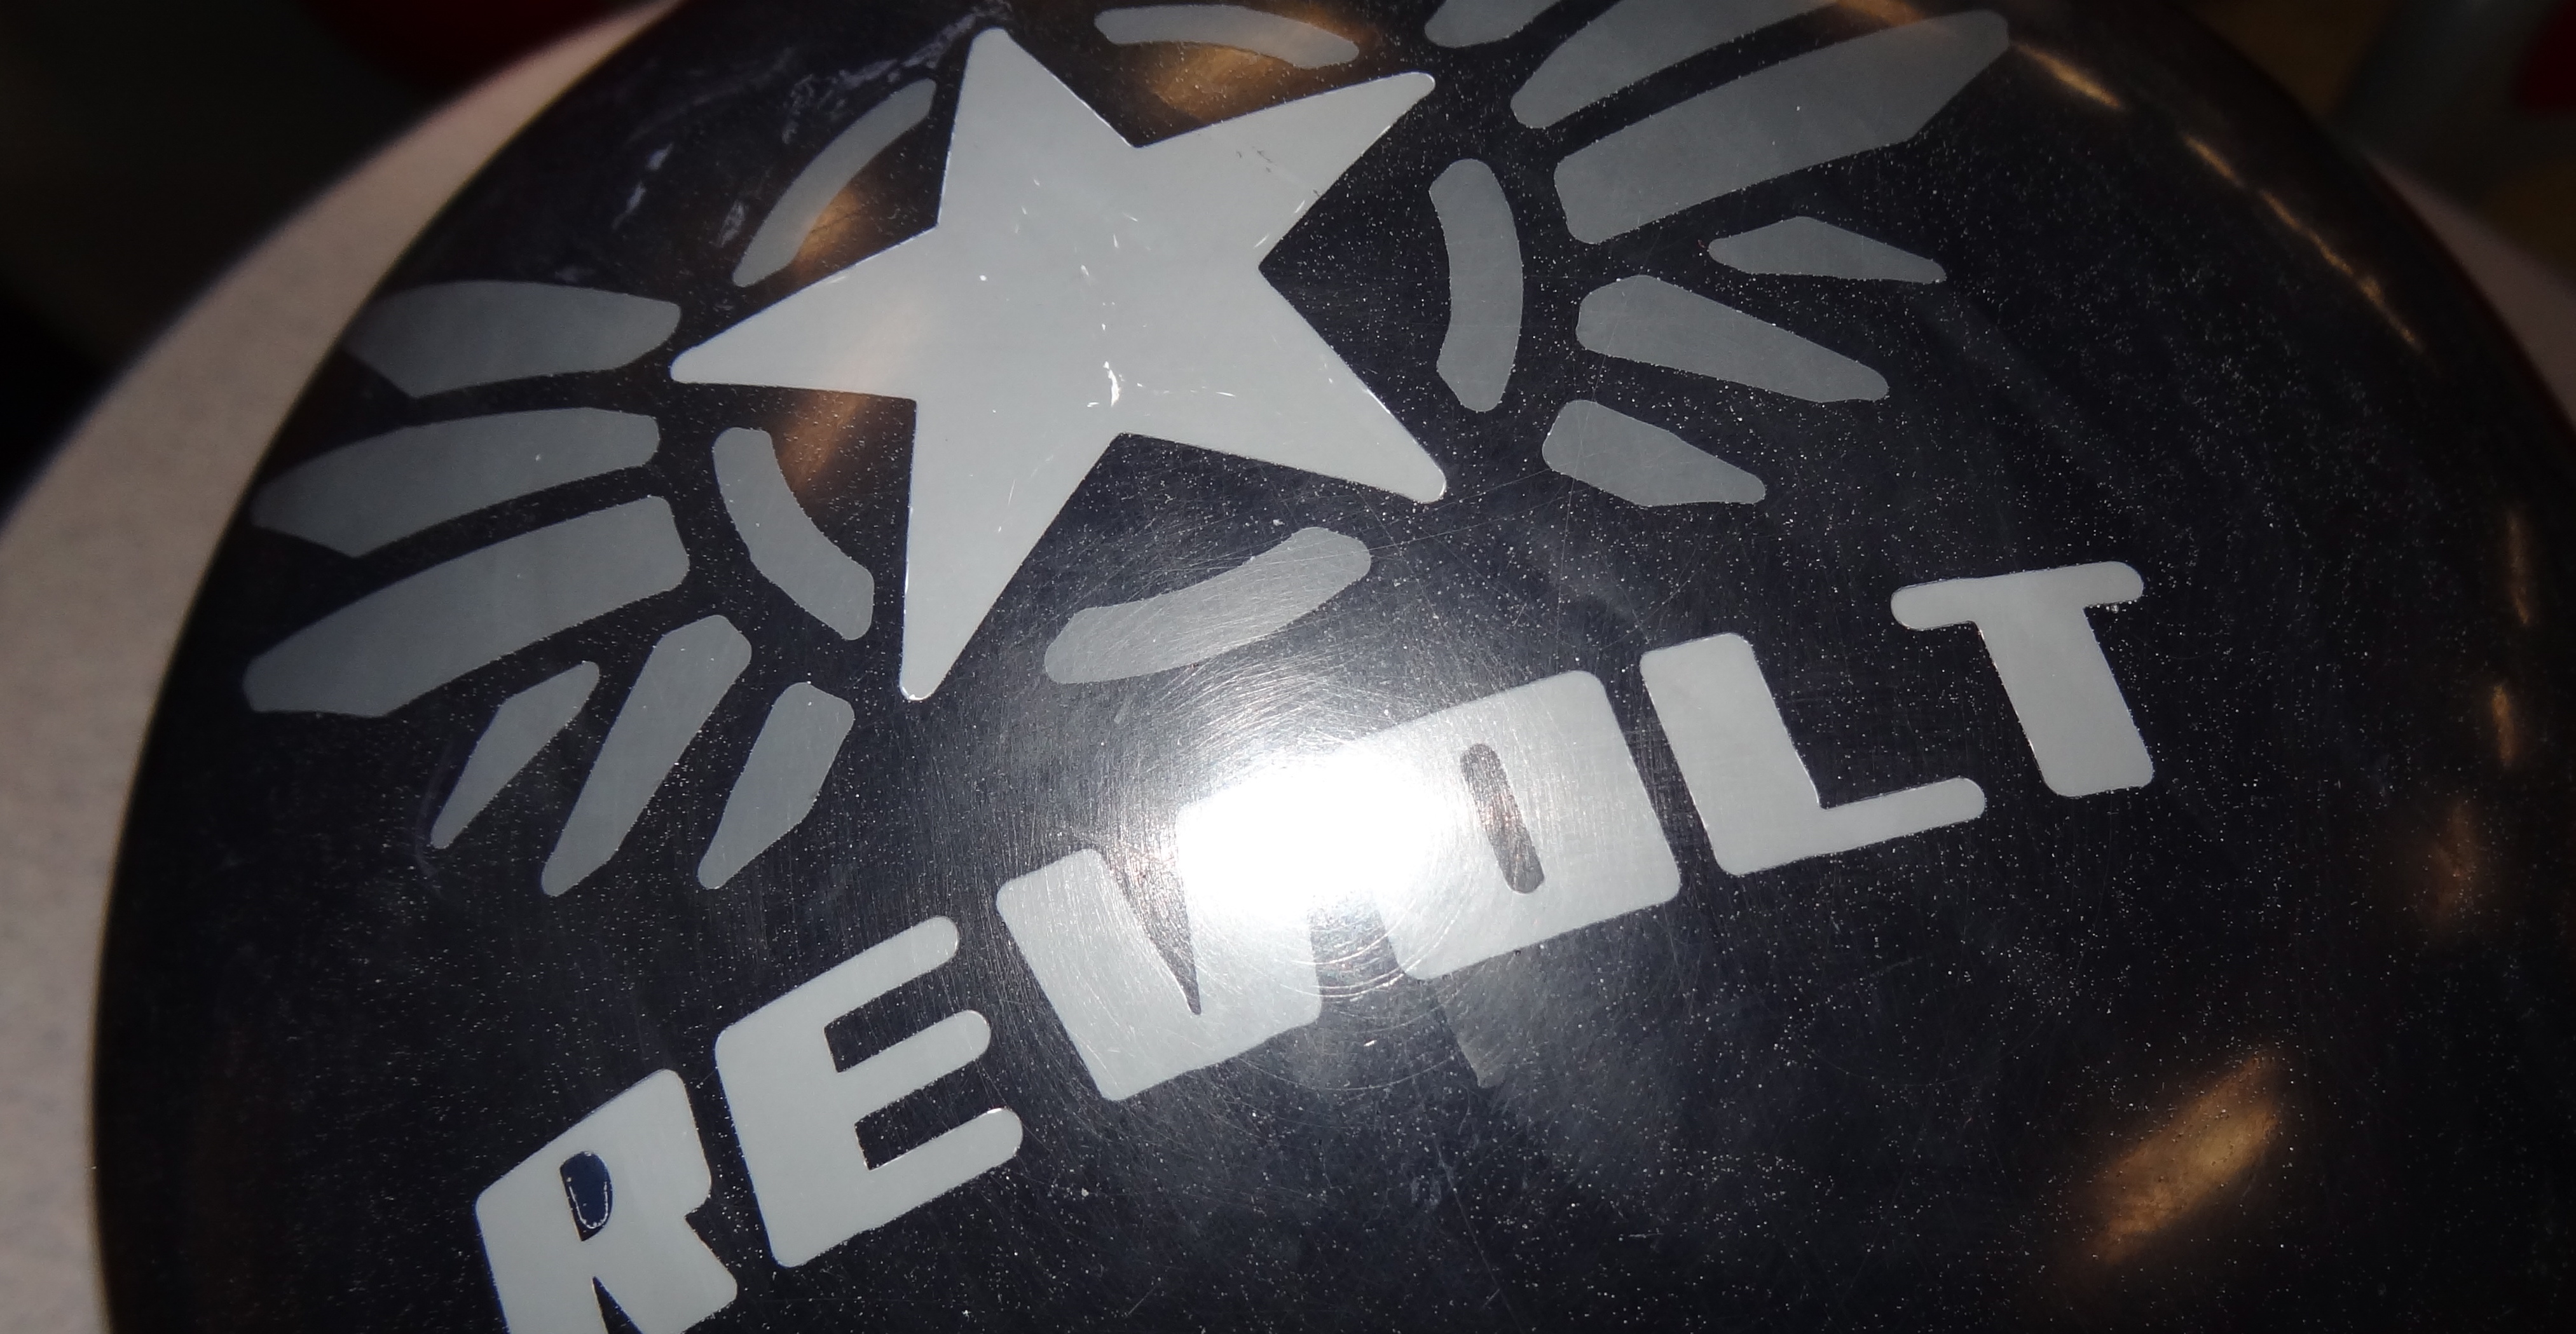 Motiv Covert Revolt Bowling Ball Review with Digitrax Analysis